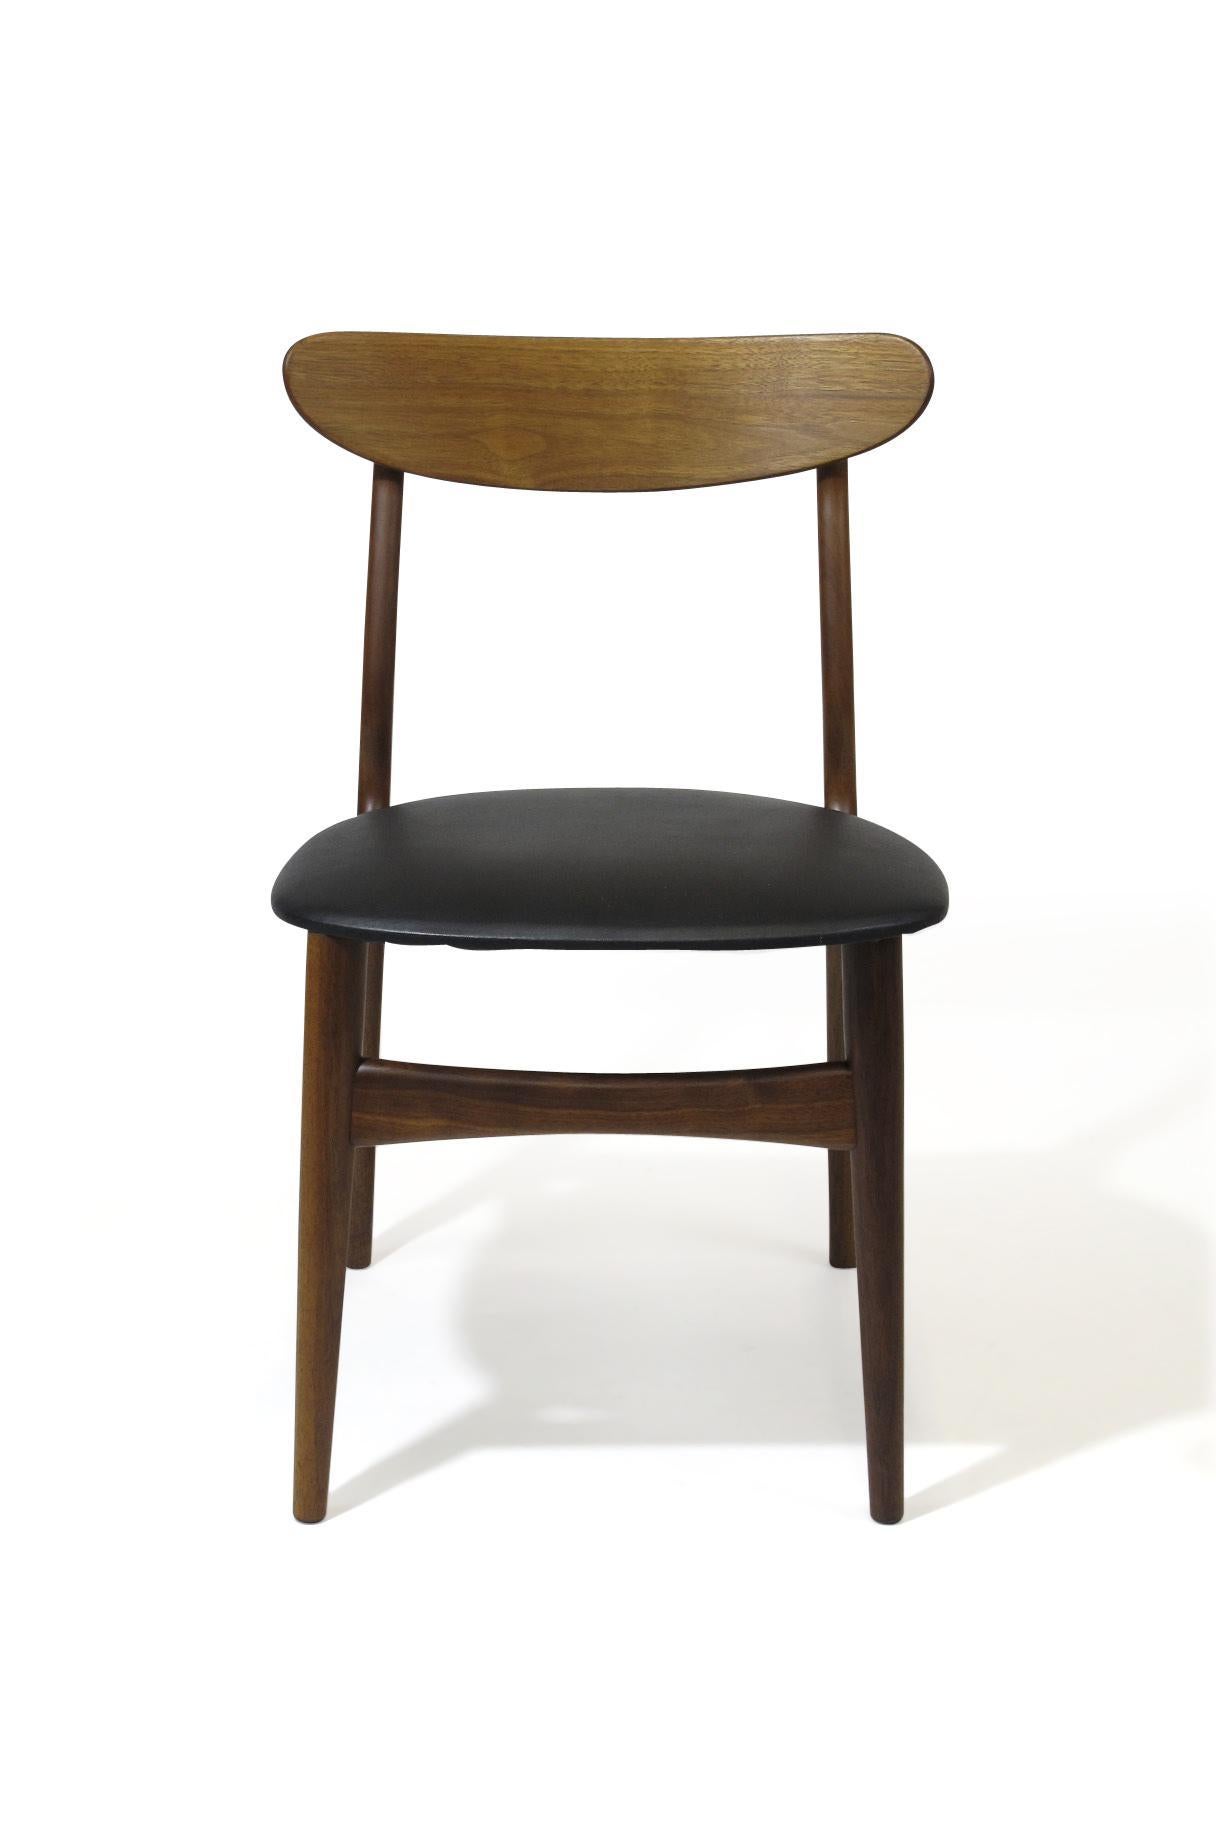 Other Four Danish Walnut Dining Chairs